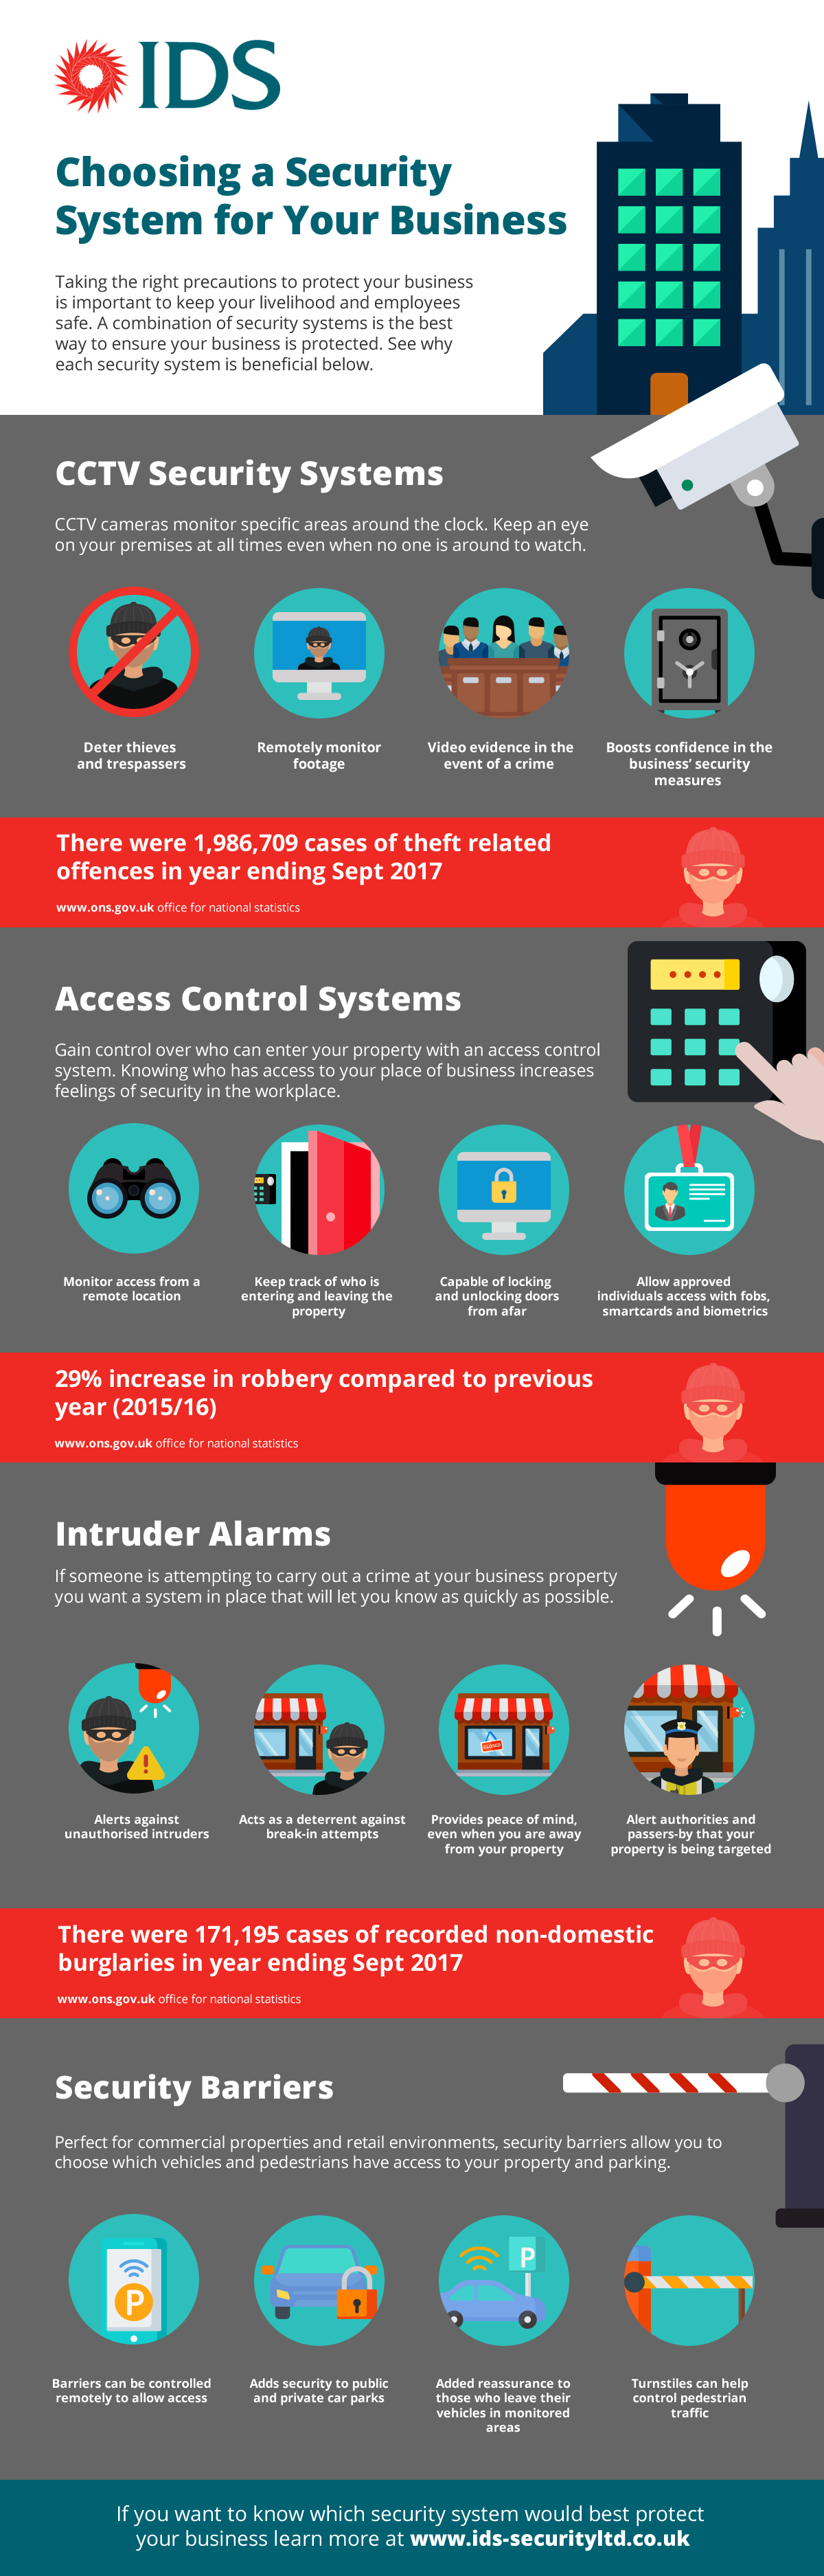 Choosing a Security System for Your Business